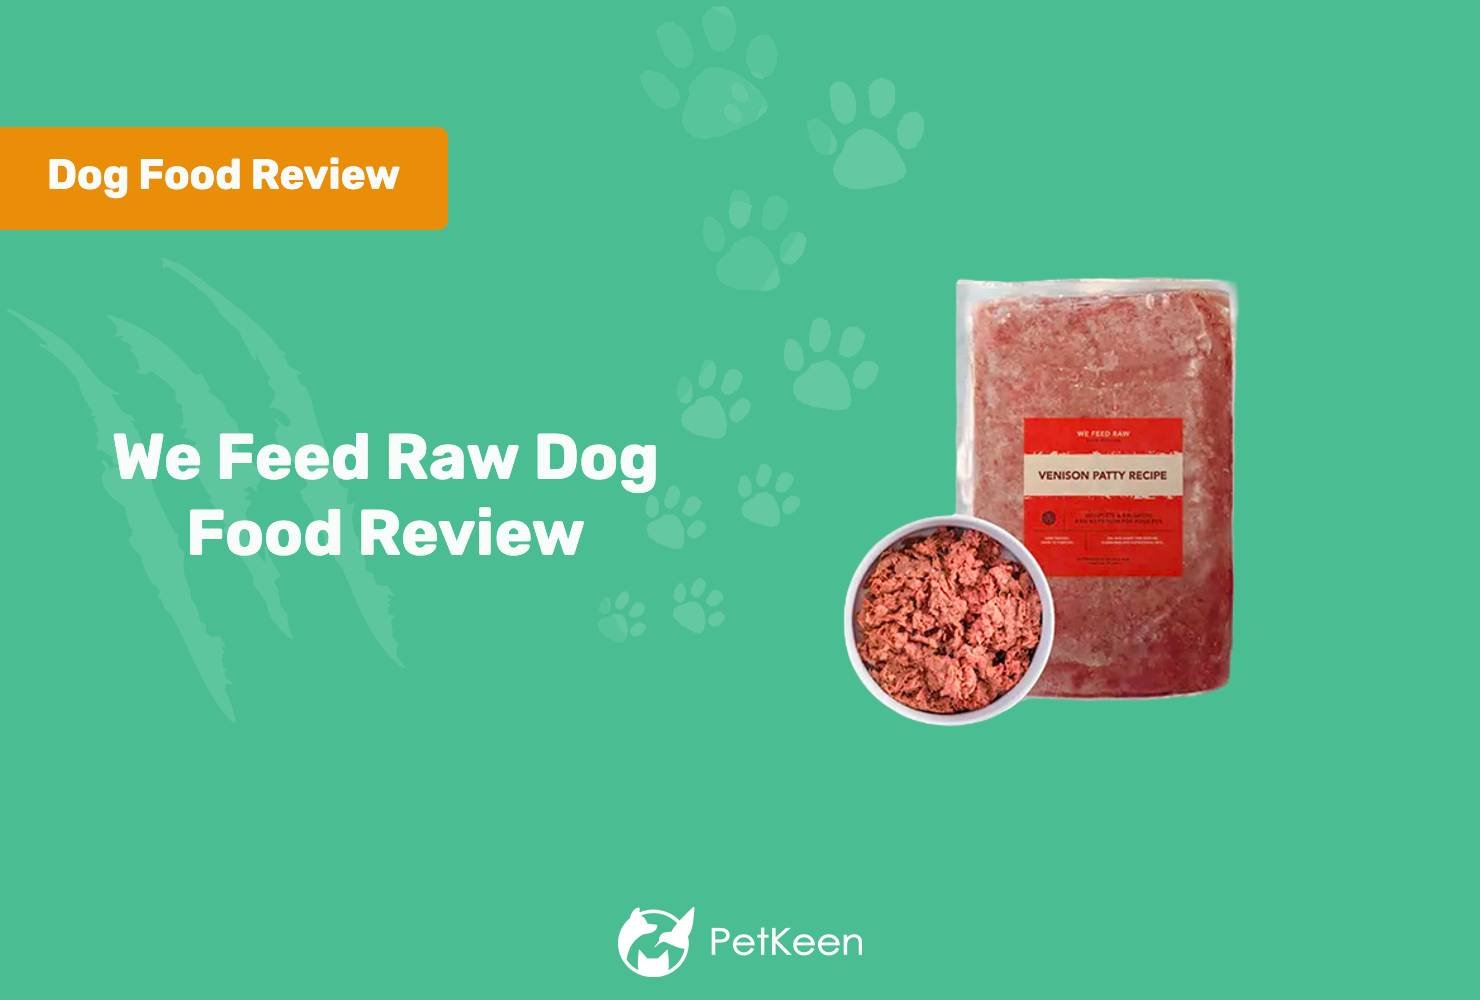 We Feed Raw Dog Food Review